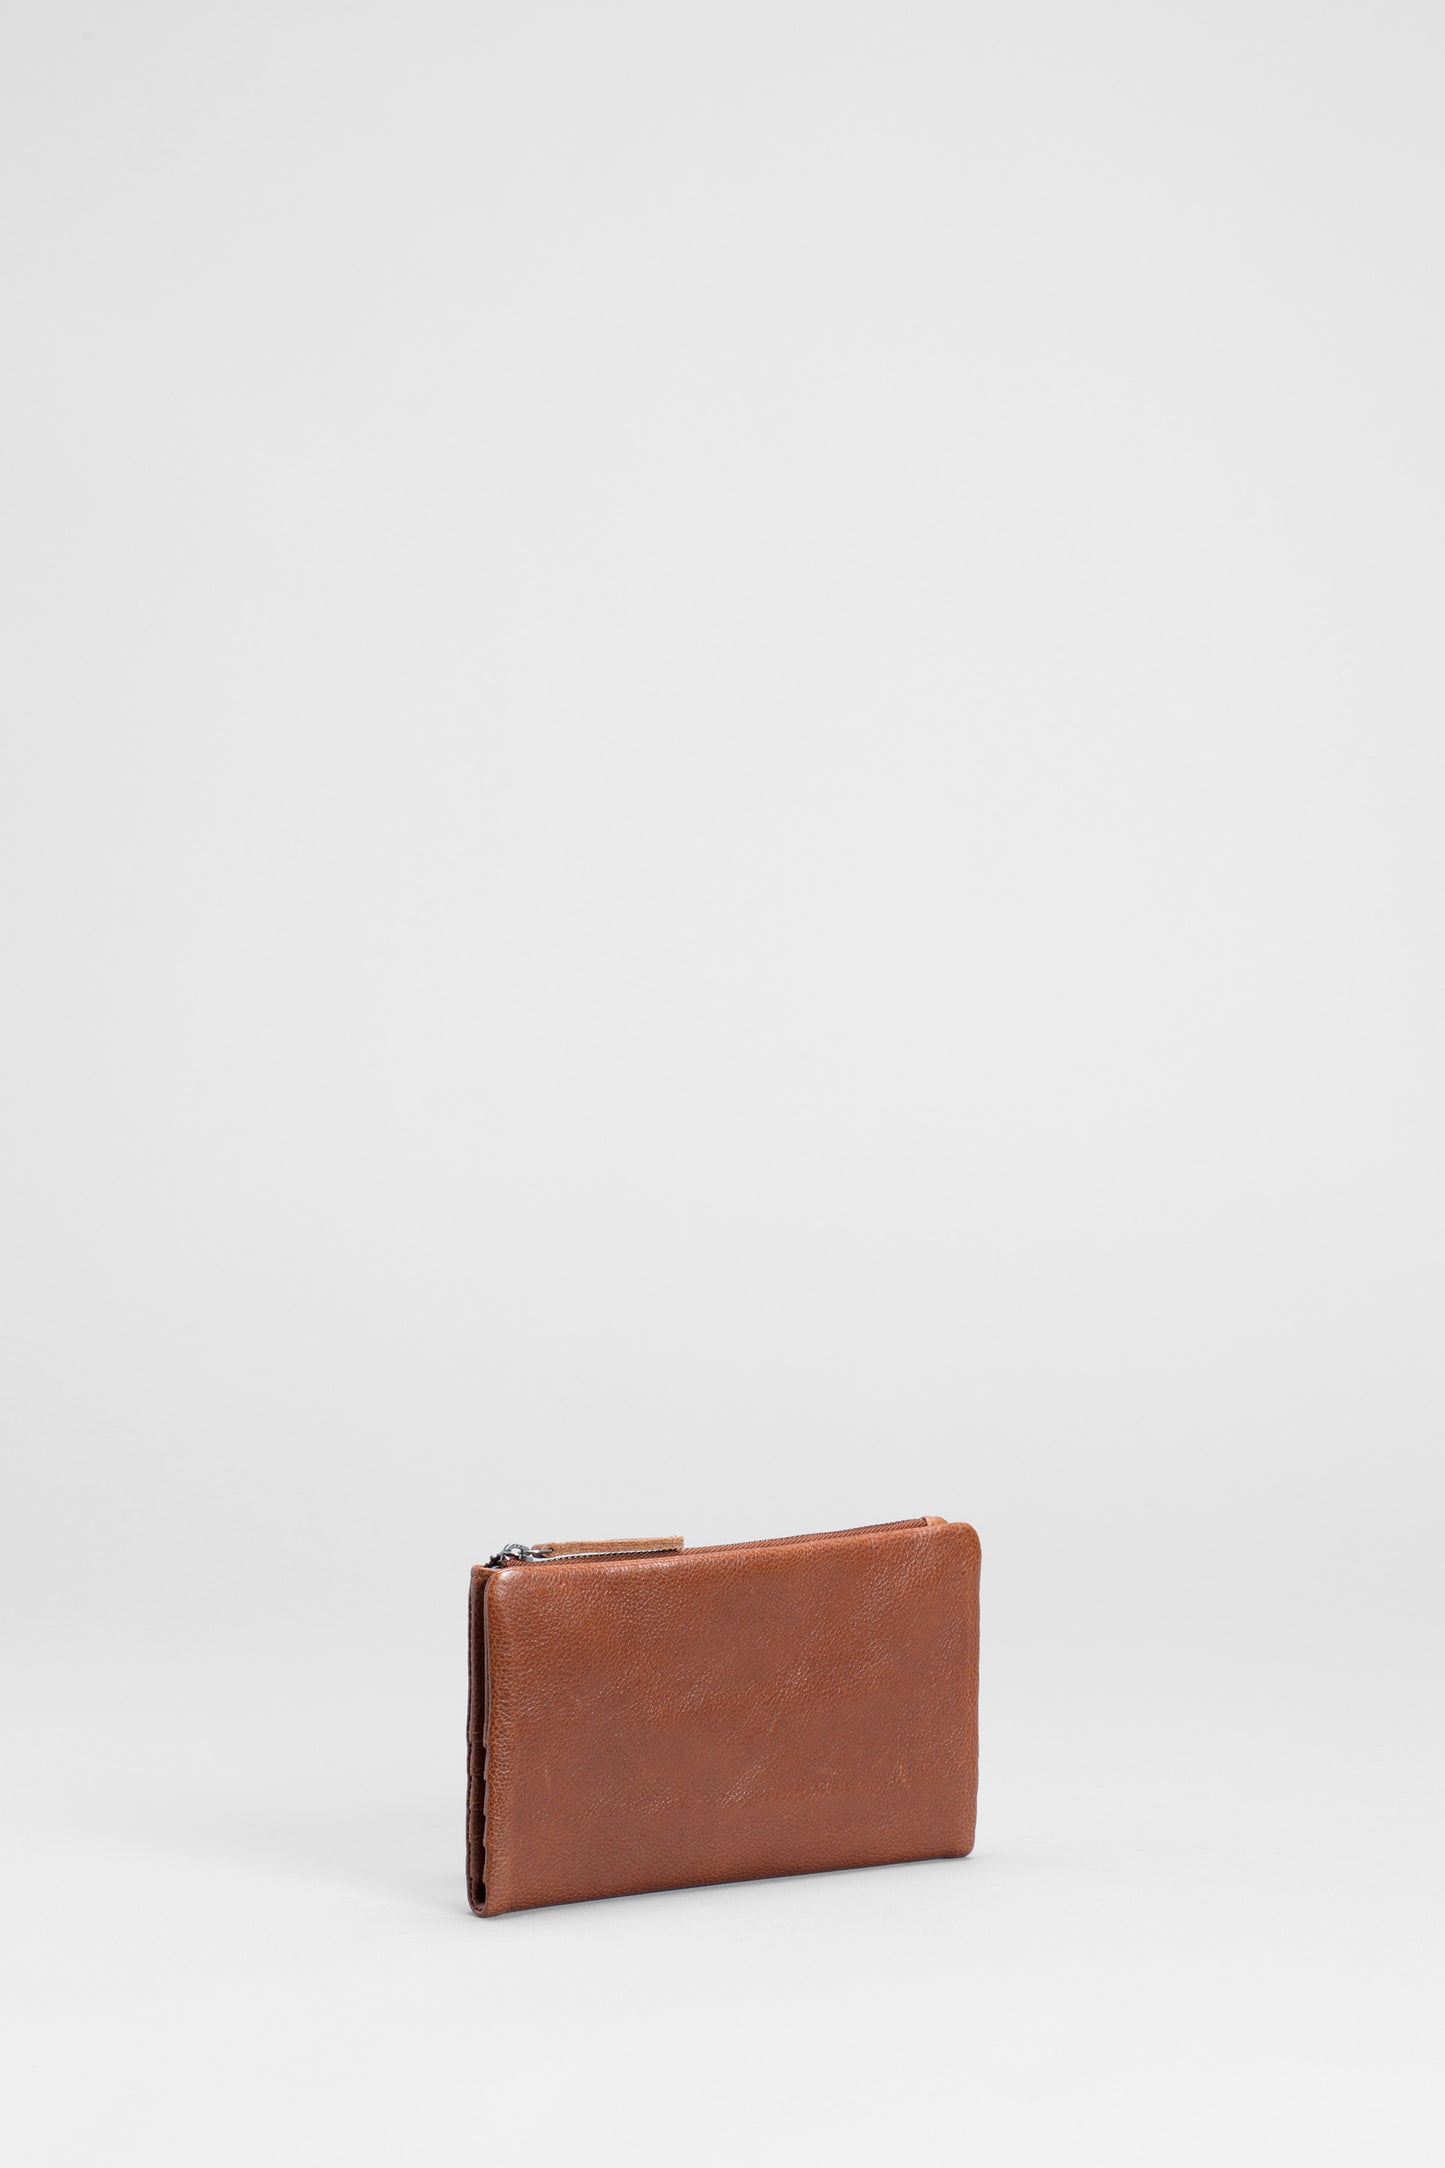 Hanna Simple Leather Zip Up Wallet Front | Tan